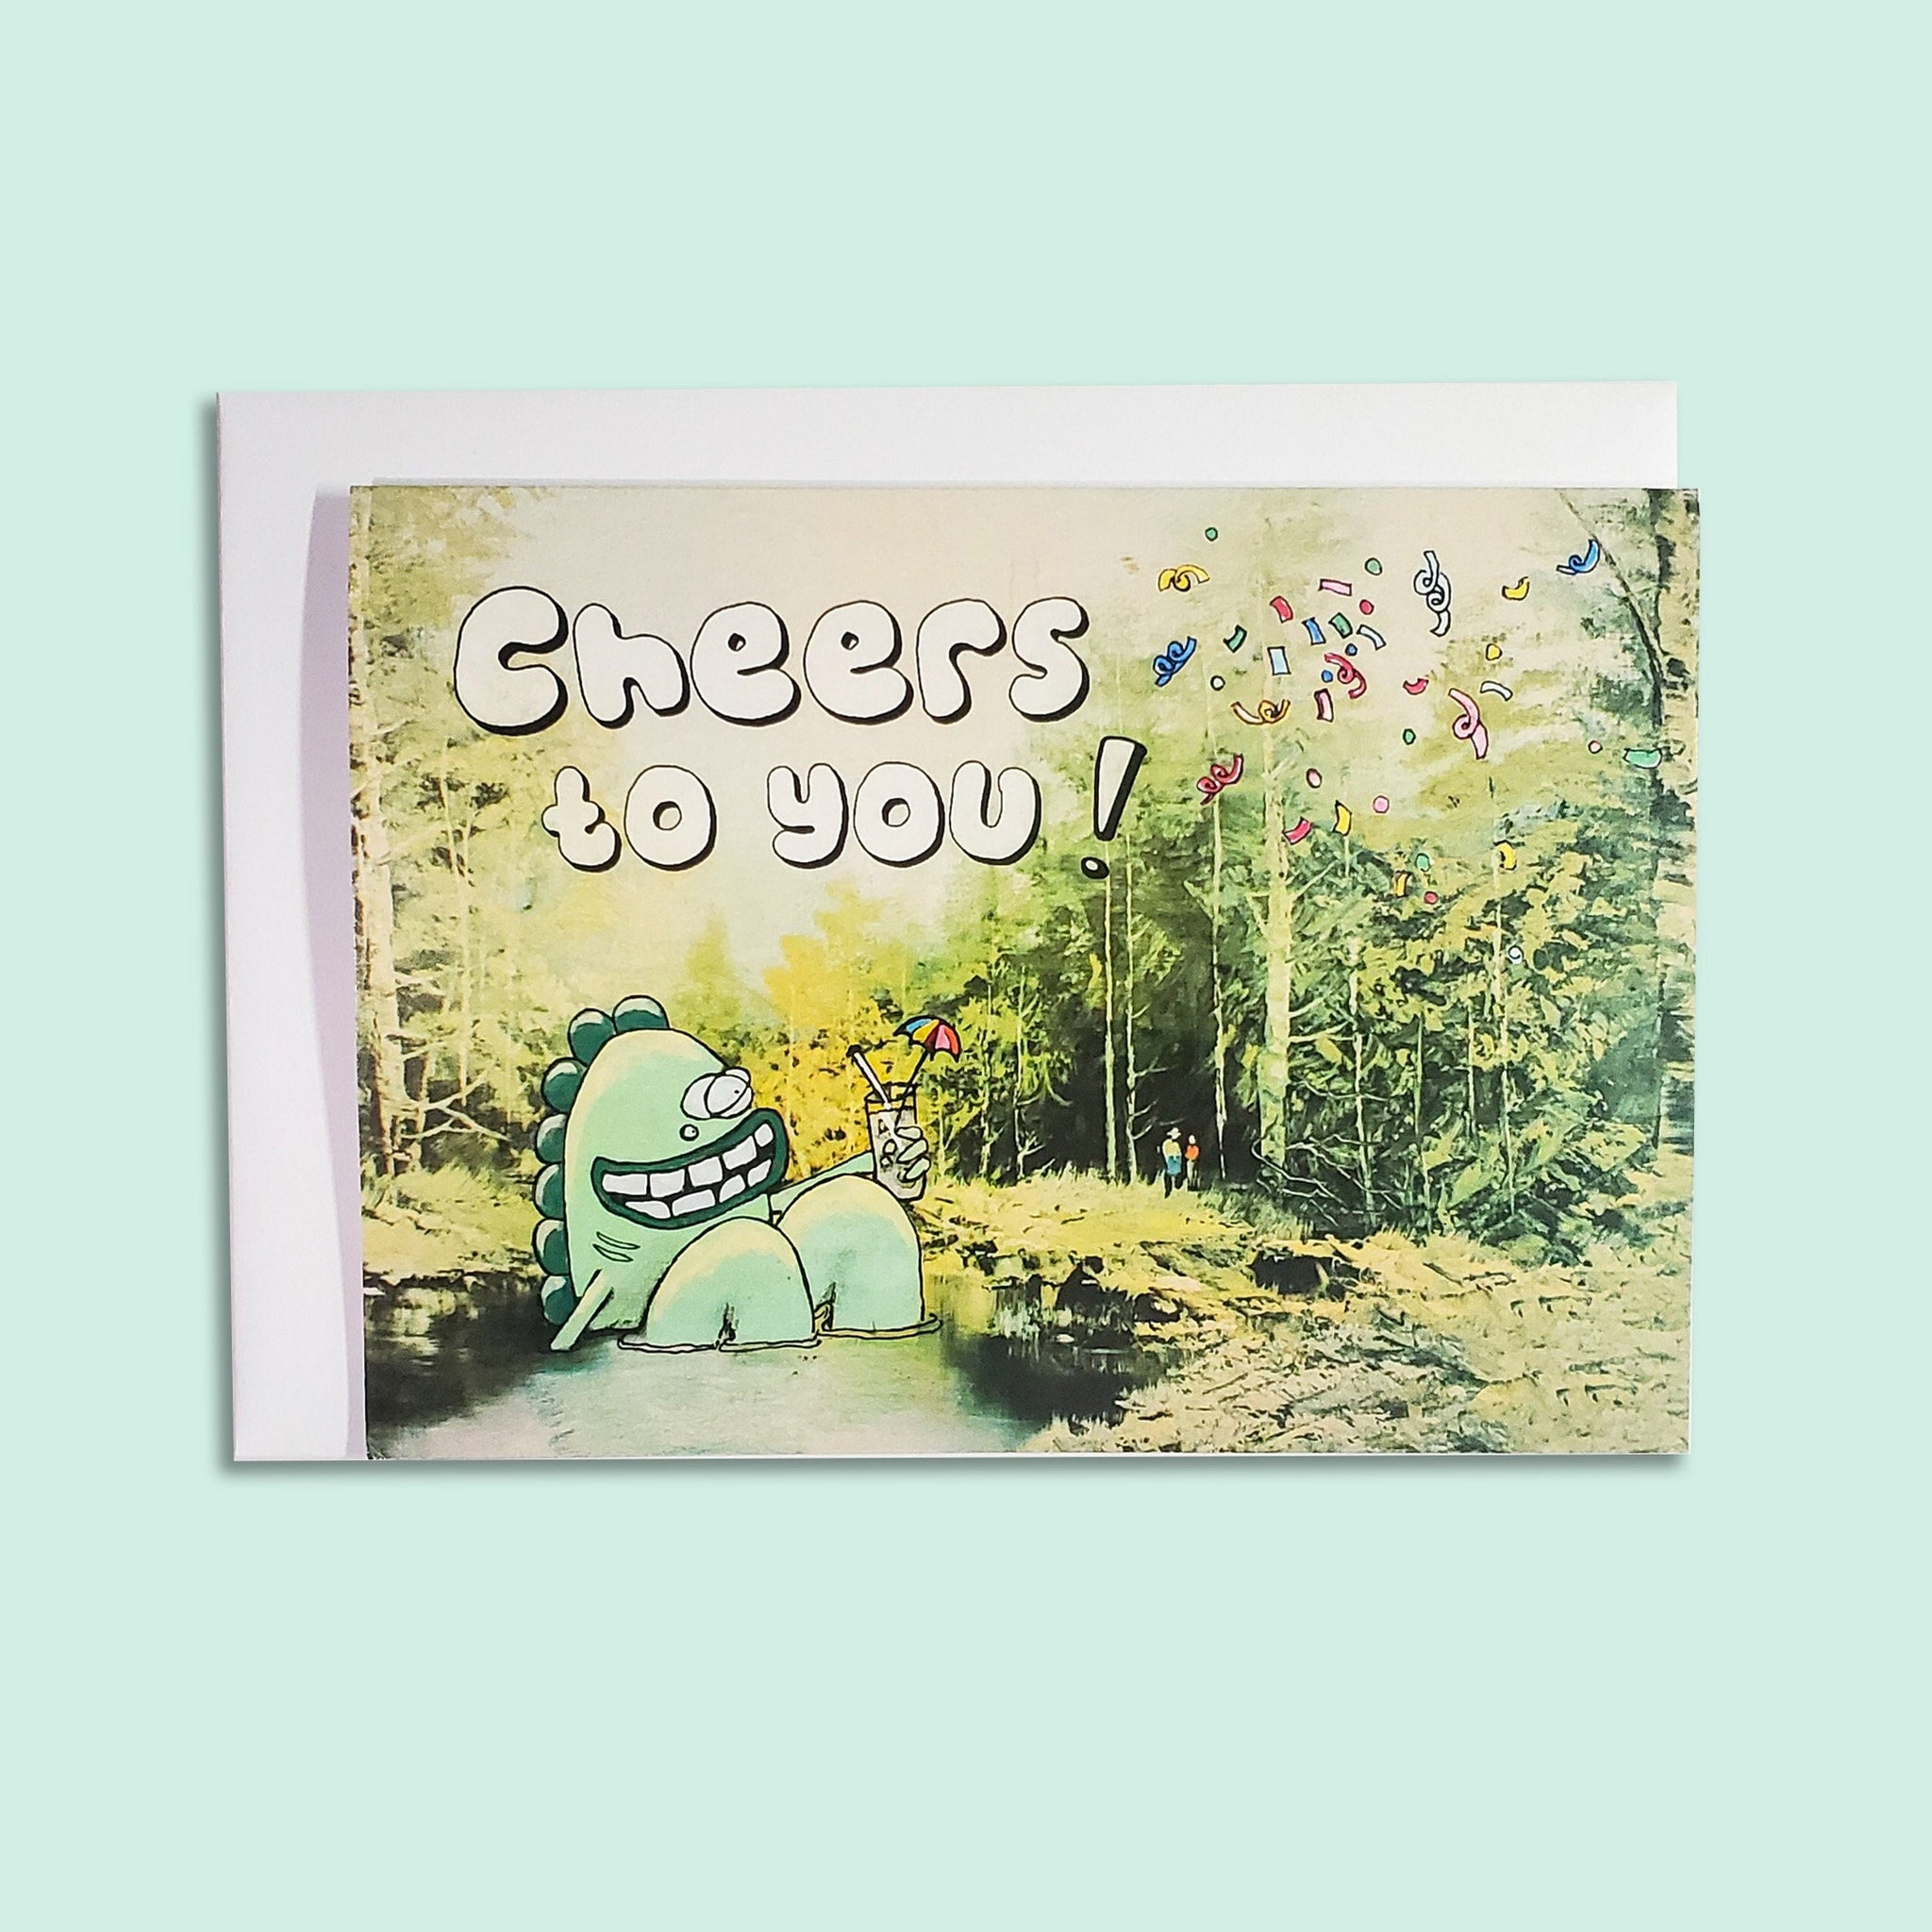 Cheers To You - Leroy's Place Greeting Card